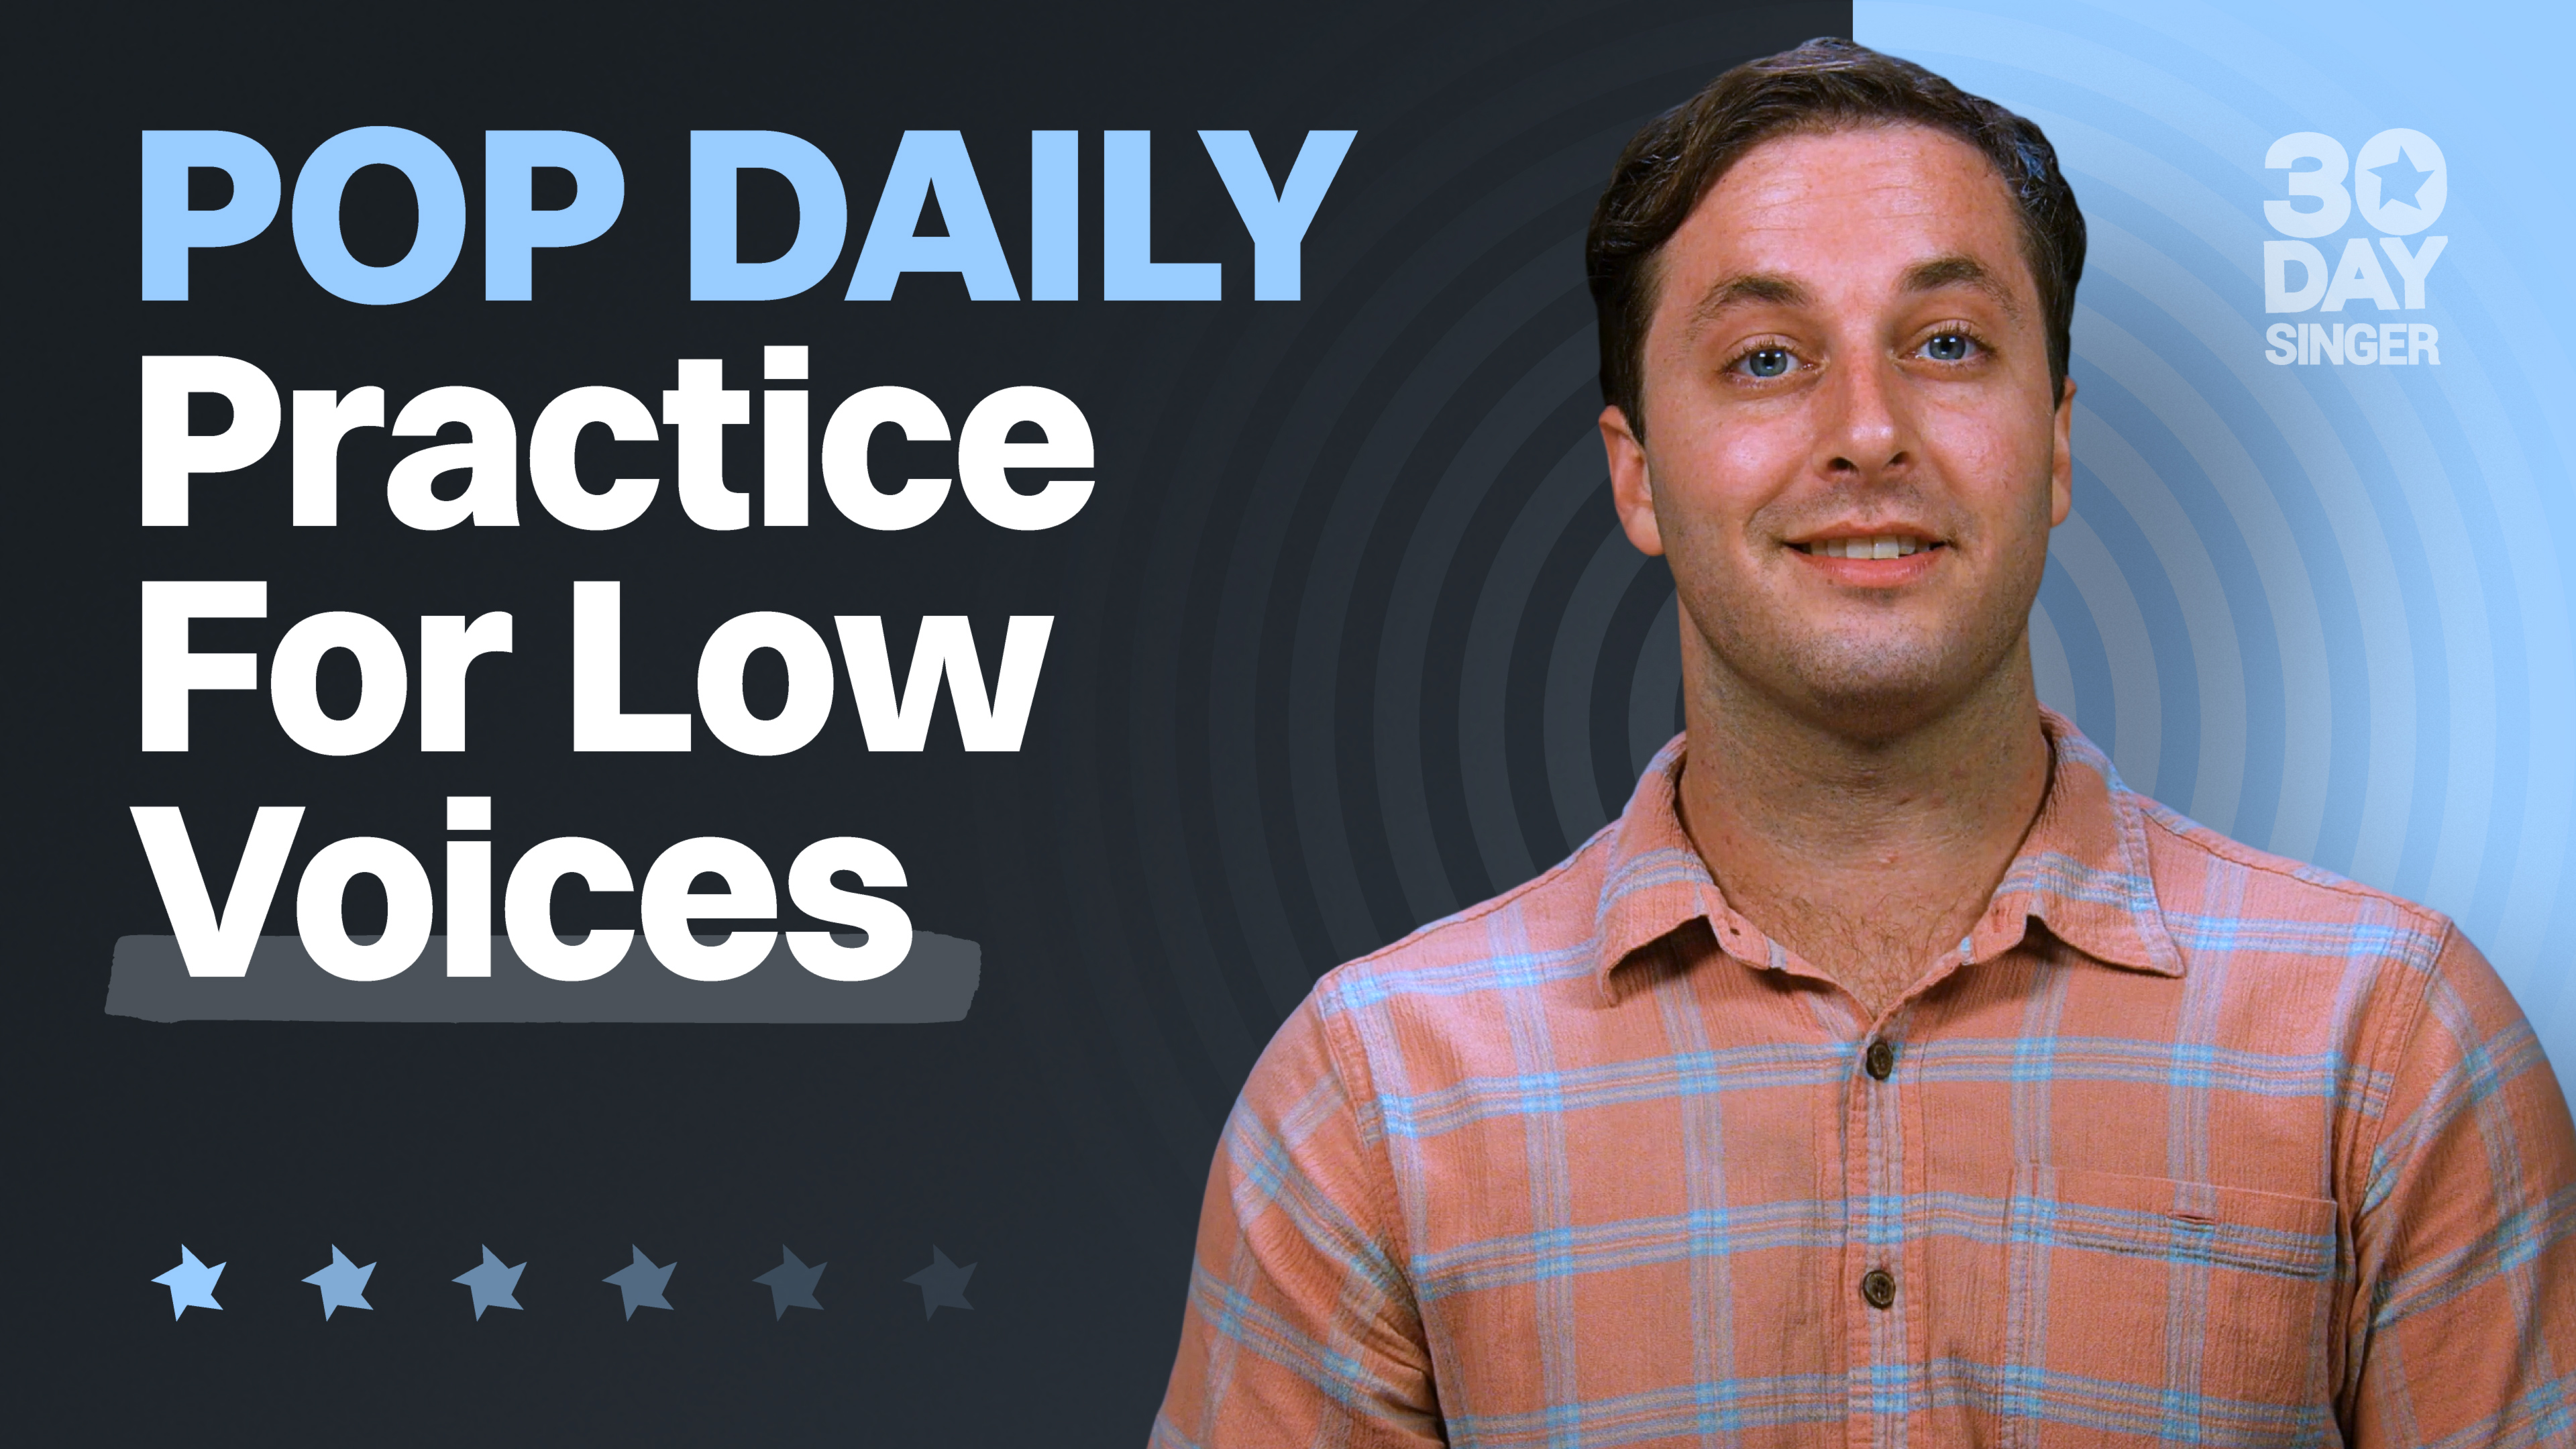 Pop Daily Practice for Low Voices